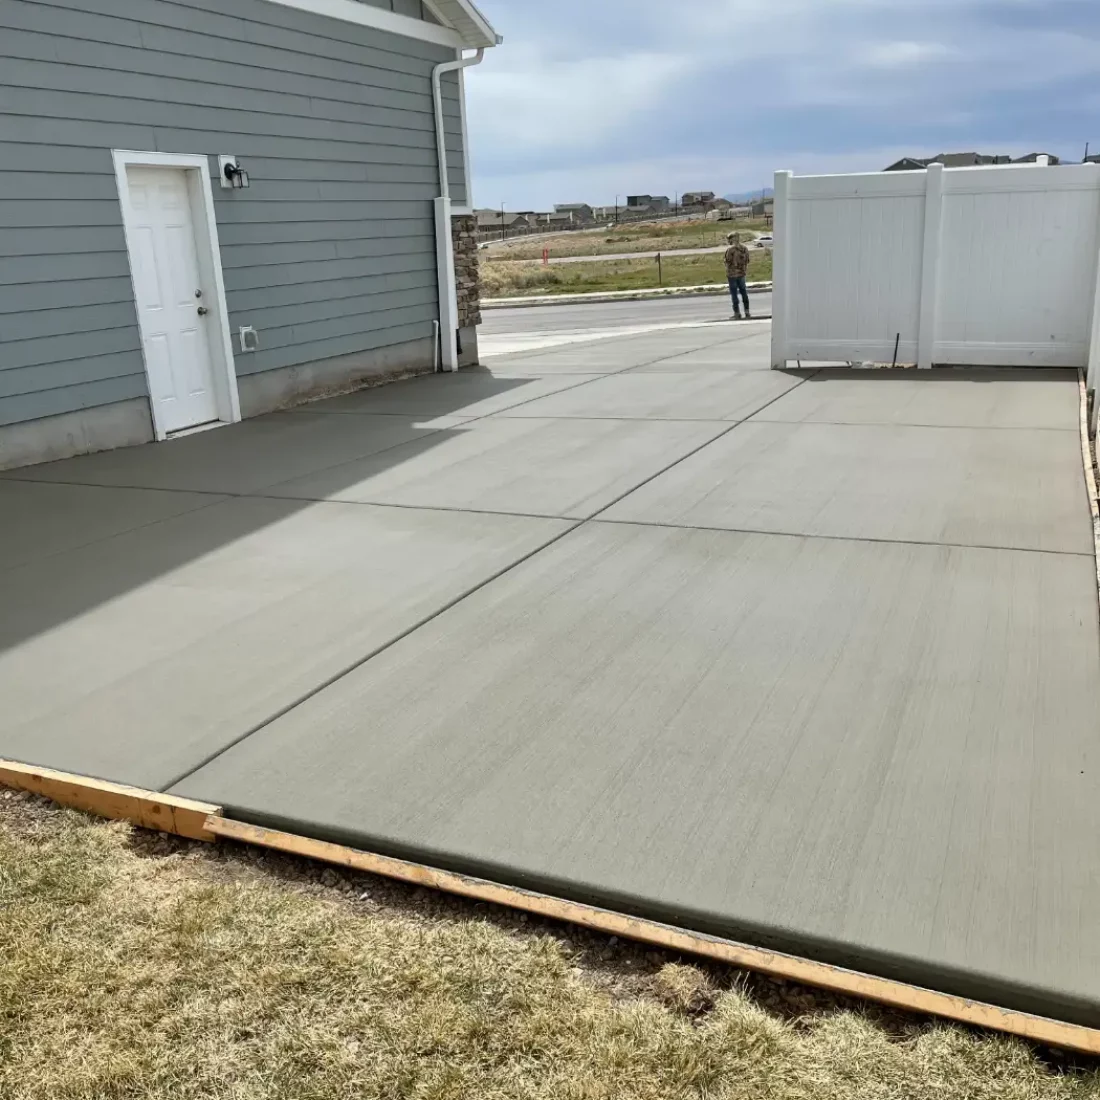 wasatch-county-concrete-rv-pad-contractor-after_1400vert